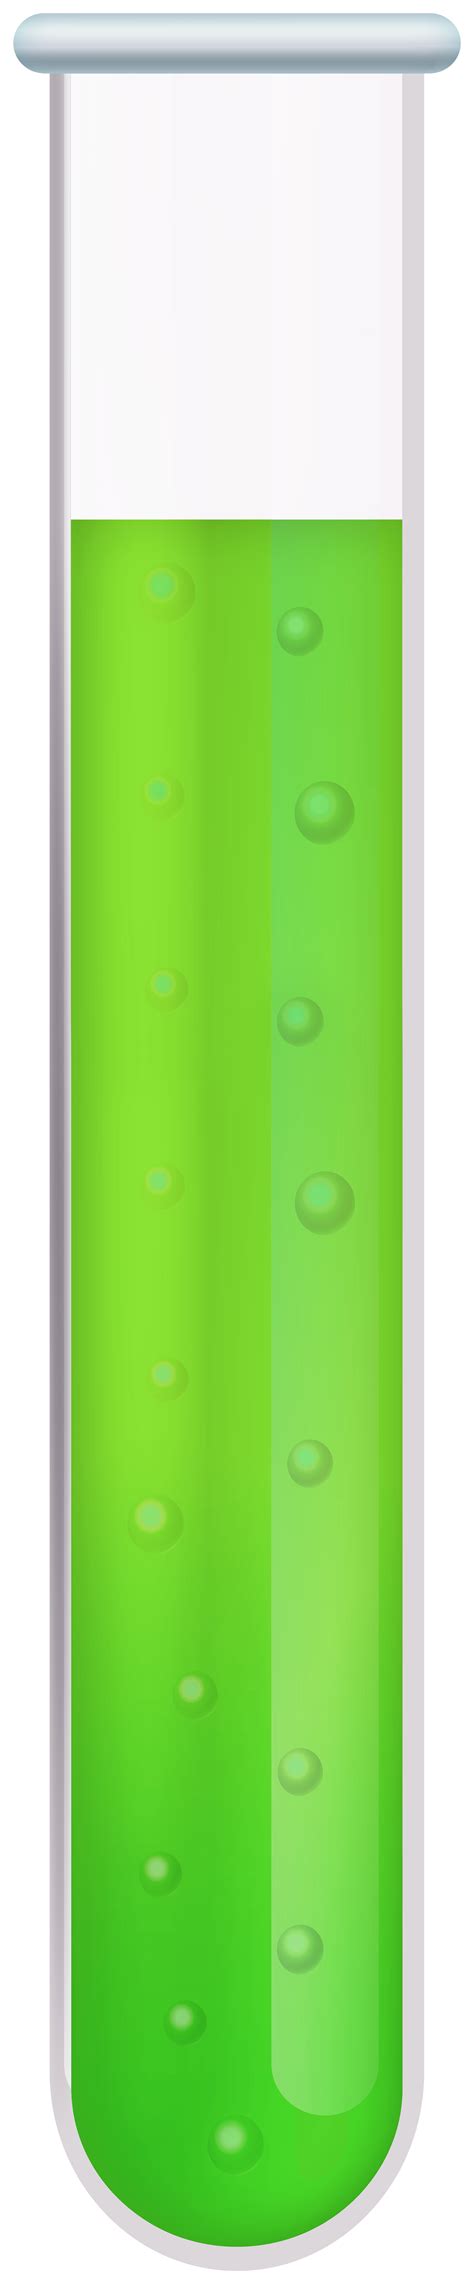 Green Liquid Sample In Test Tube Png Clipart Best Web Clipart